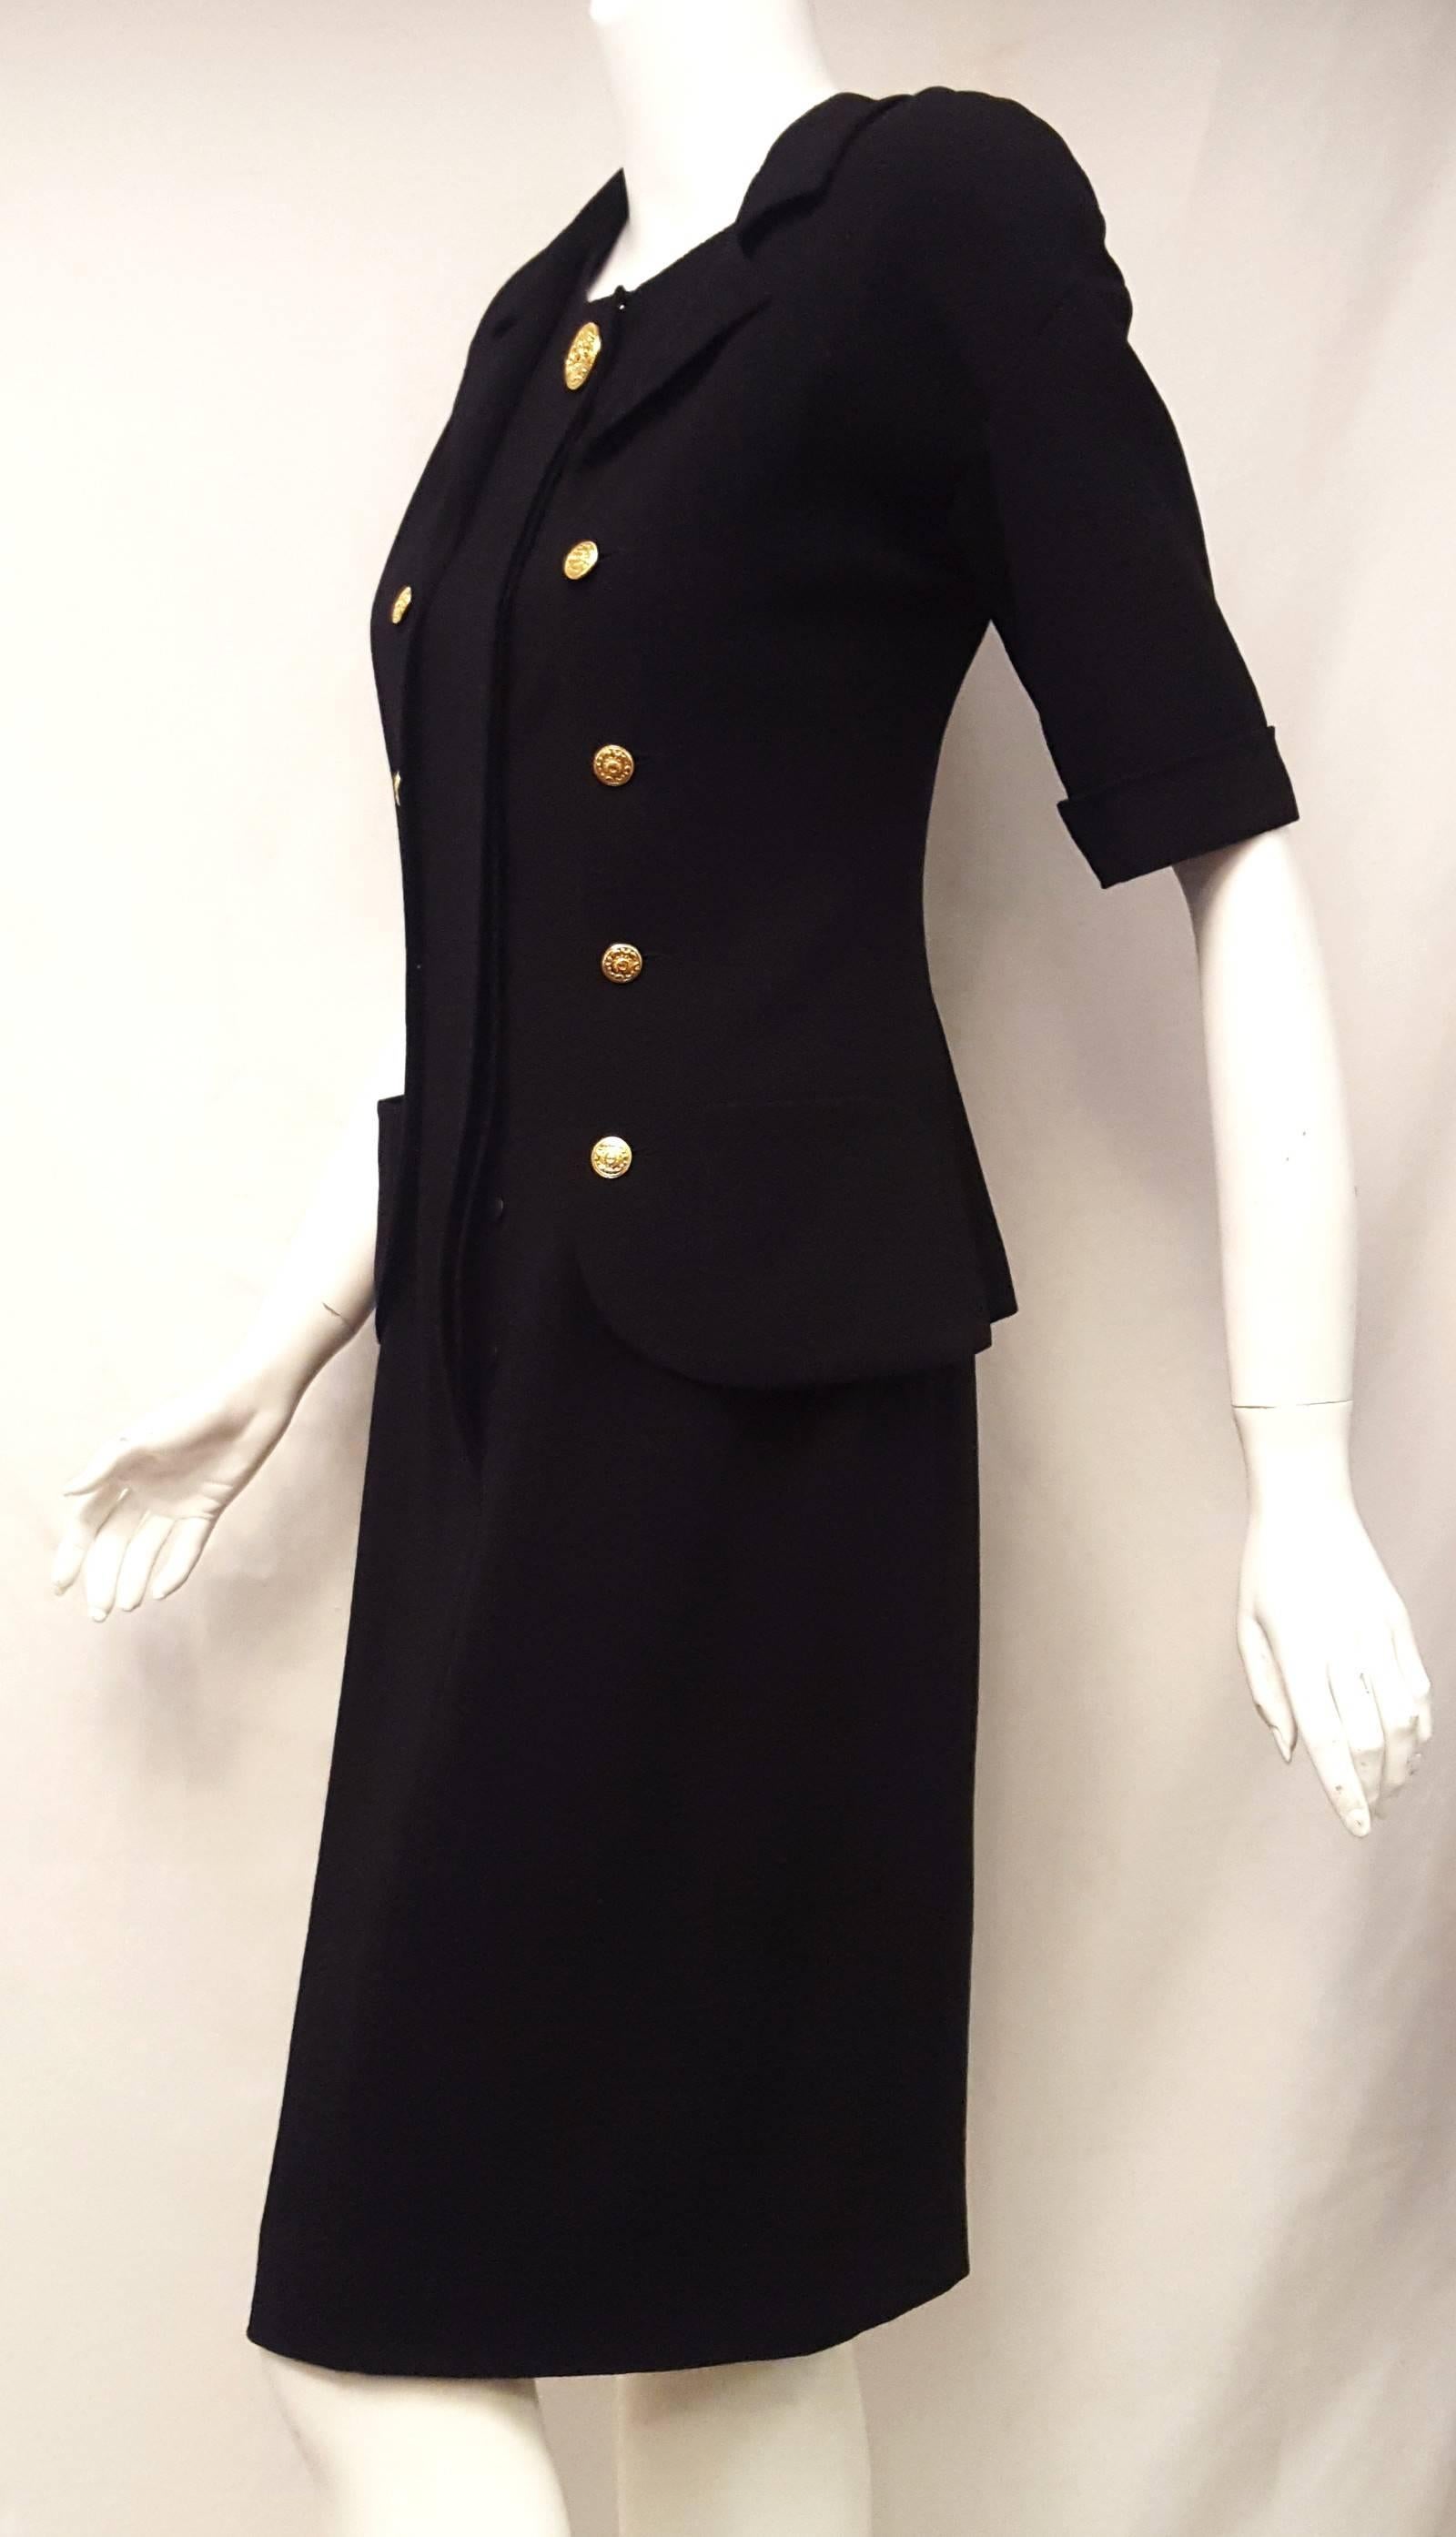 This Chanel black notch collar dress resembles a two piece suit with its faux jacket style.  The jacket does not detach even though it contains 8  goldtone Chanel buttons & buttonholes at each side of front hidden closure with one large Chanel gold